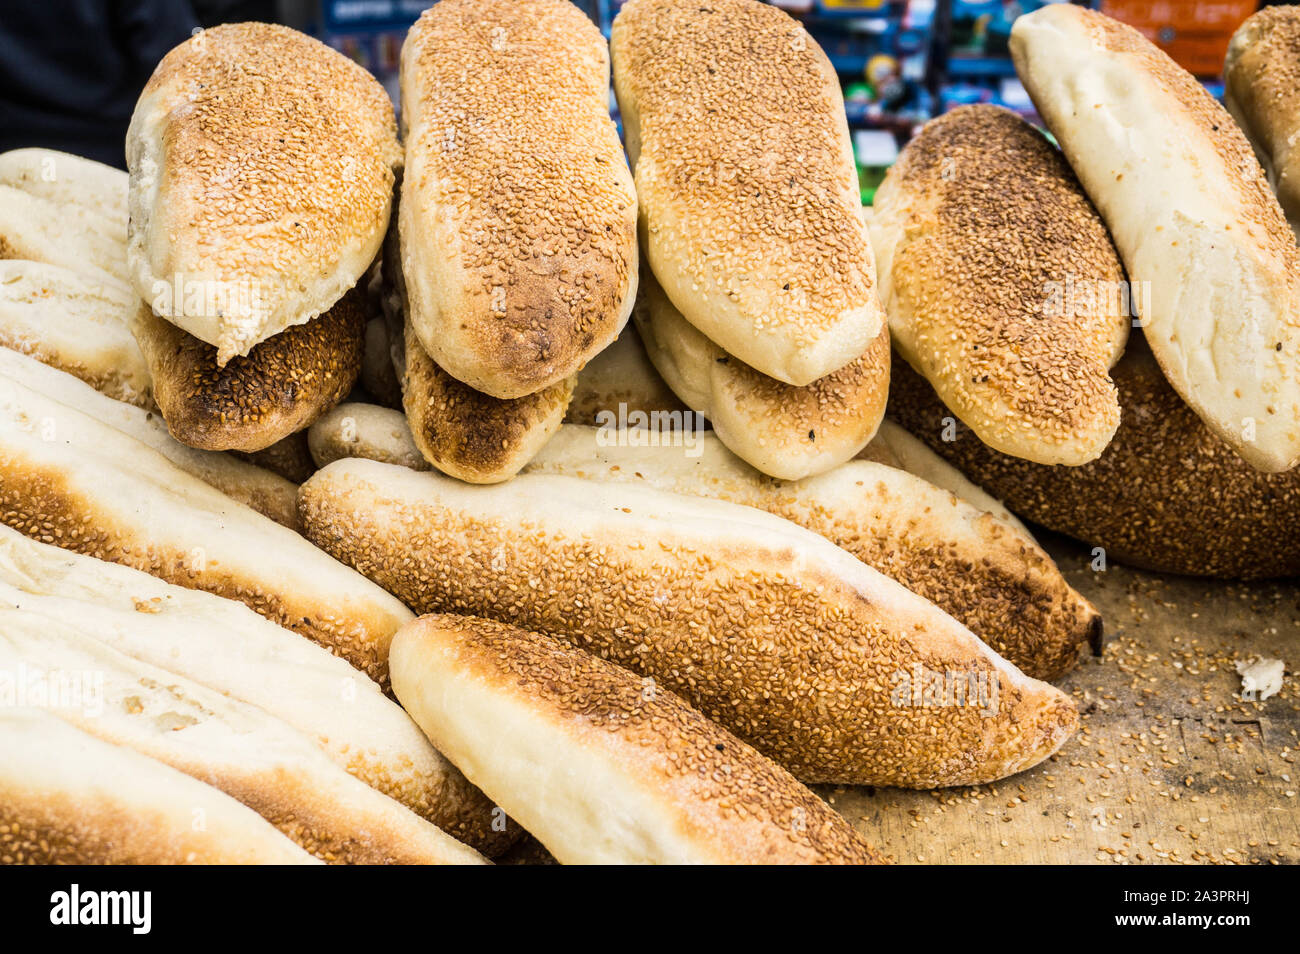 Middle Eastern bread Stock Photo